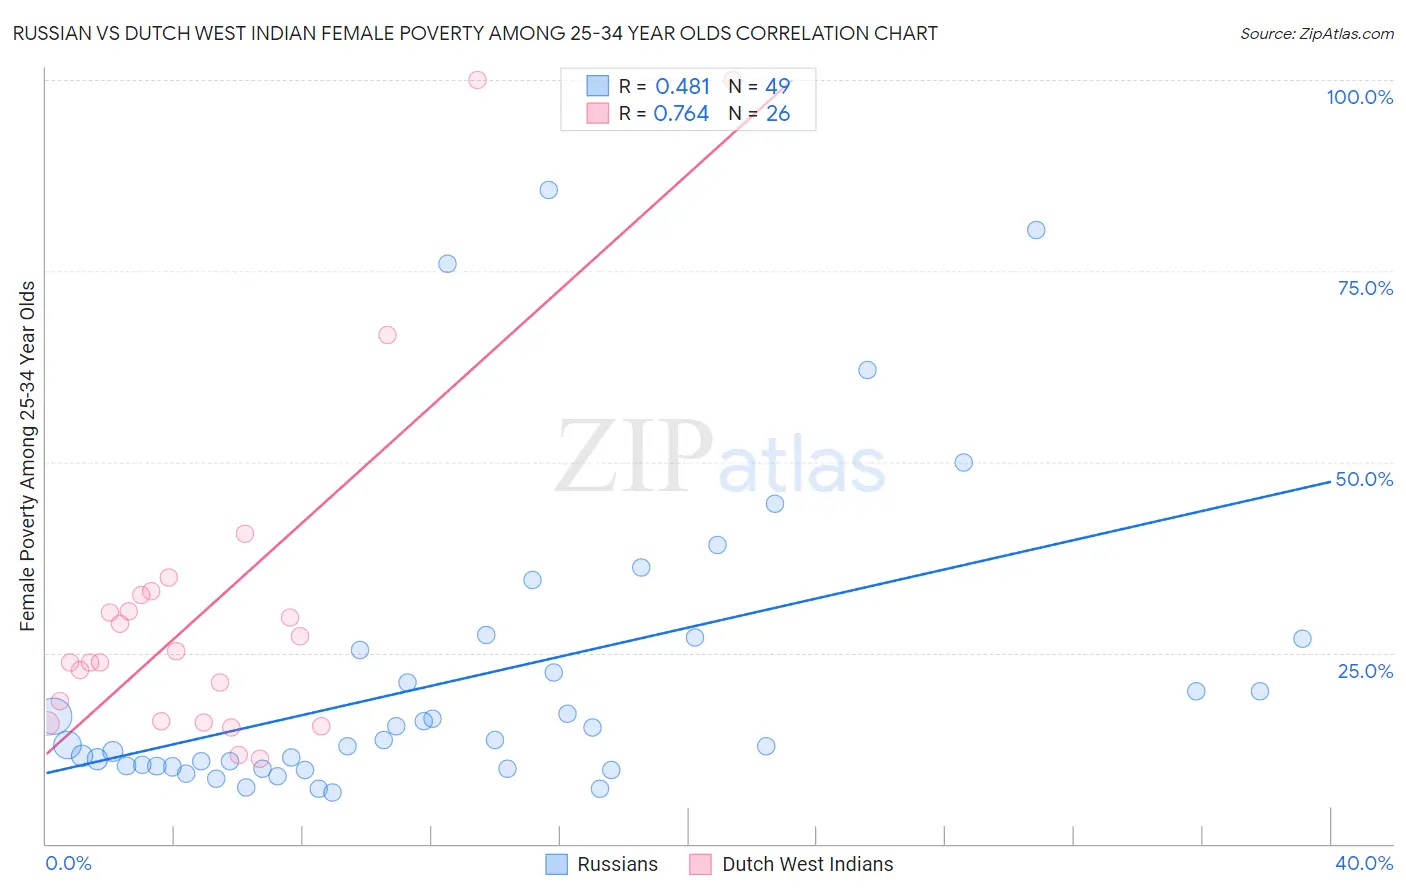 Russian vs Dutch West Indian Female Poverty Among 25-34 Year Olds